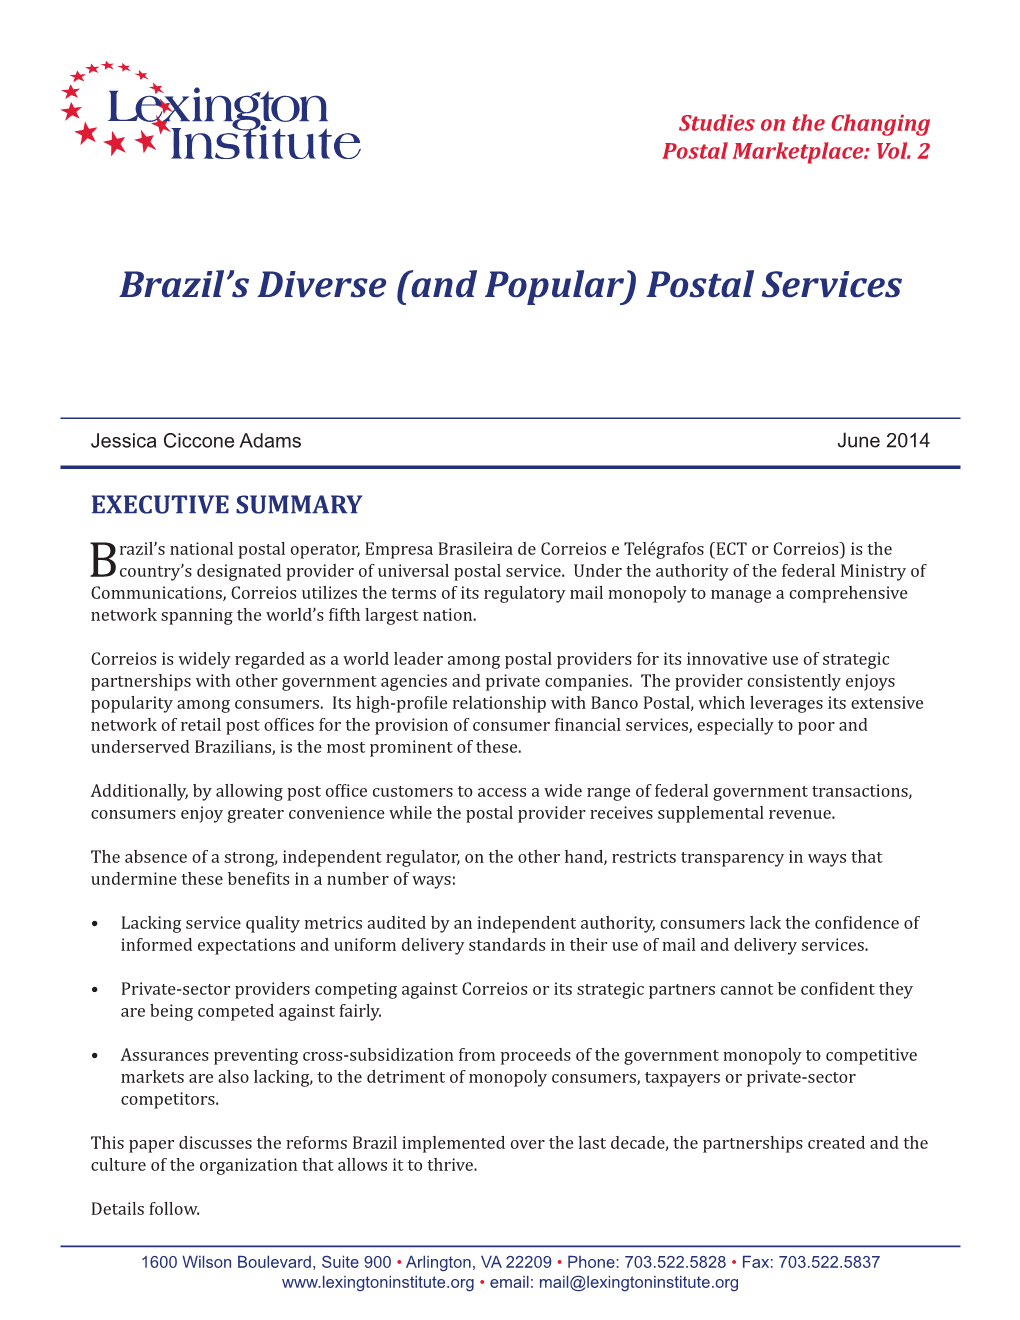 Brazil's Diverse (And Popular) Postal Services